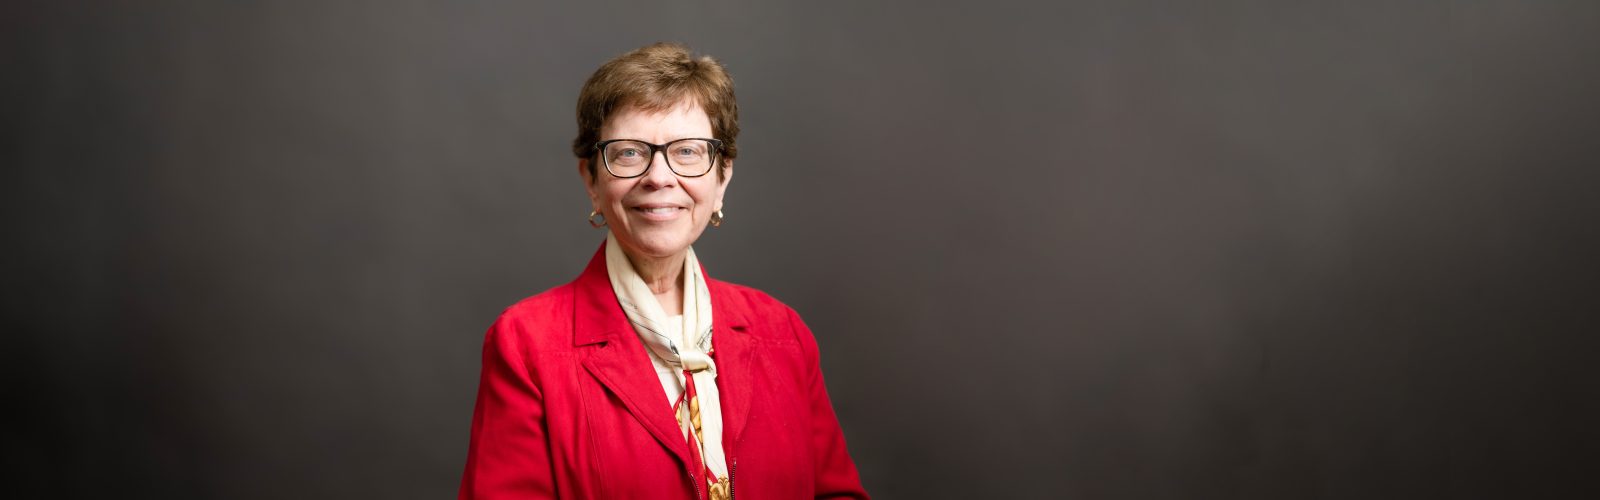 Portrait of Rebecca Blank smiling and wearing a read jacket with a white silk scarf tied loosely around her neck. She is standing against a dark gray studio backdrop.